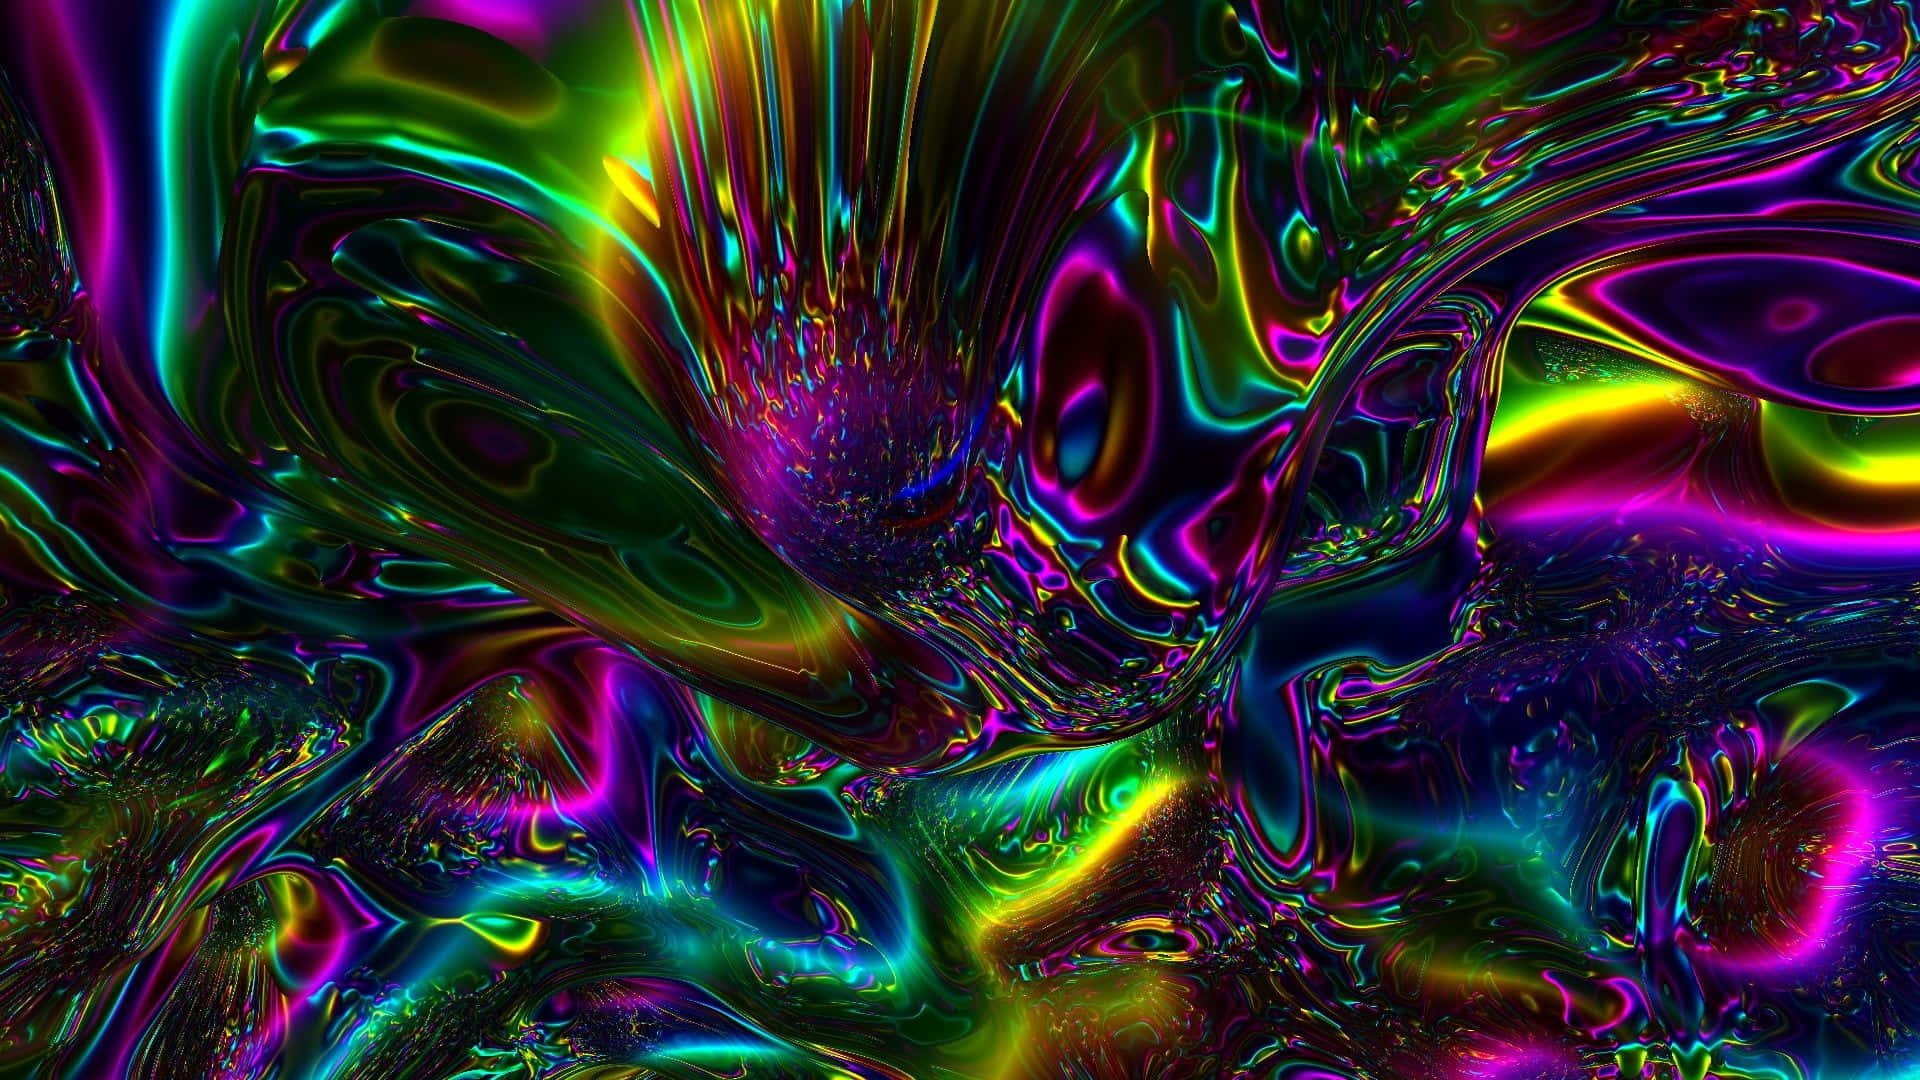 "Illuminate your life with Psychedelic Colors!" Wallpaper